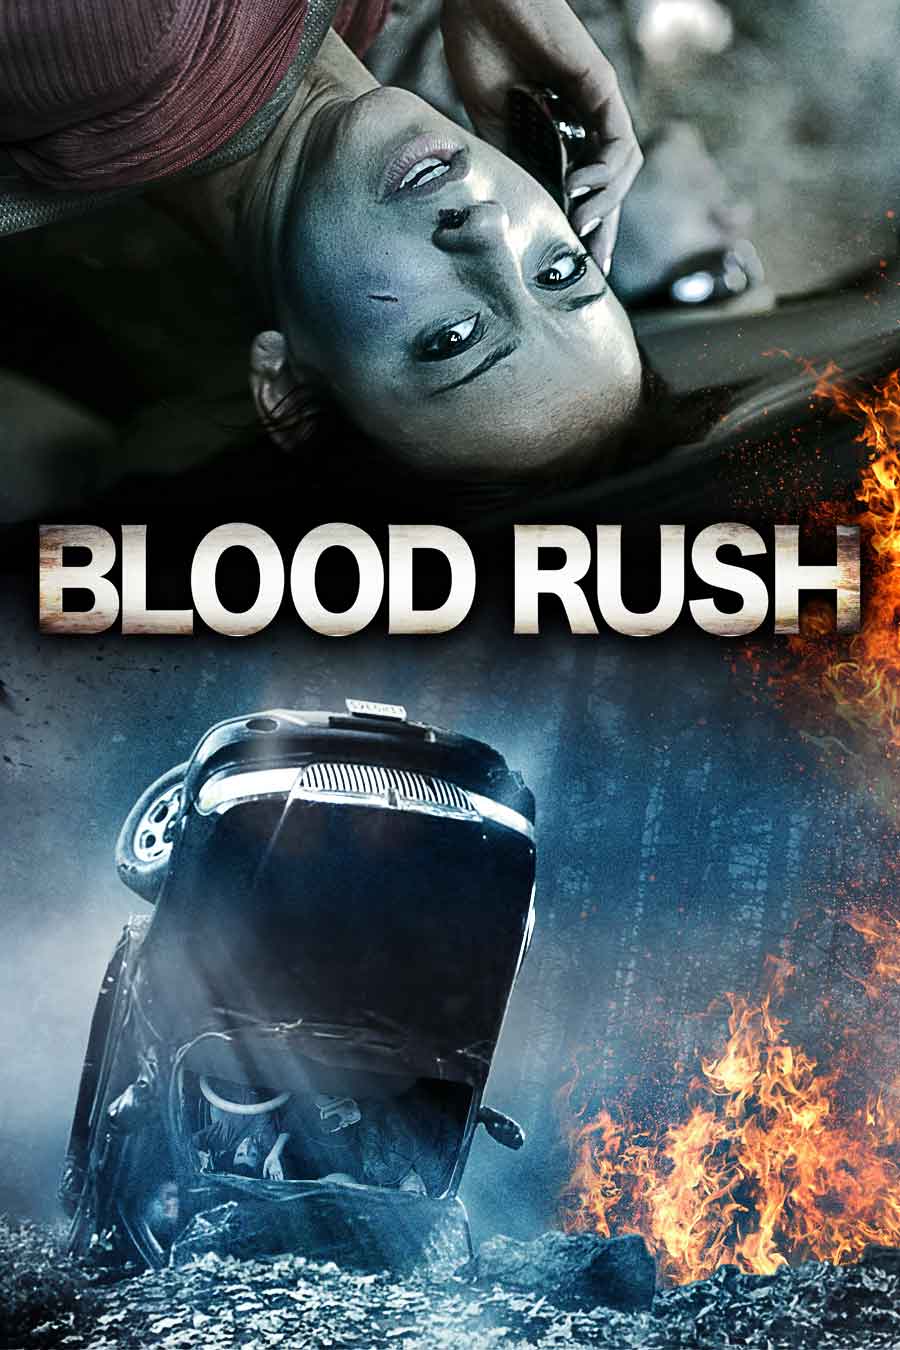 VOD News on the Upcoming Thriller Blood Rush Starring Stella Maeve and Michael Madsen Body Count Rising